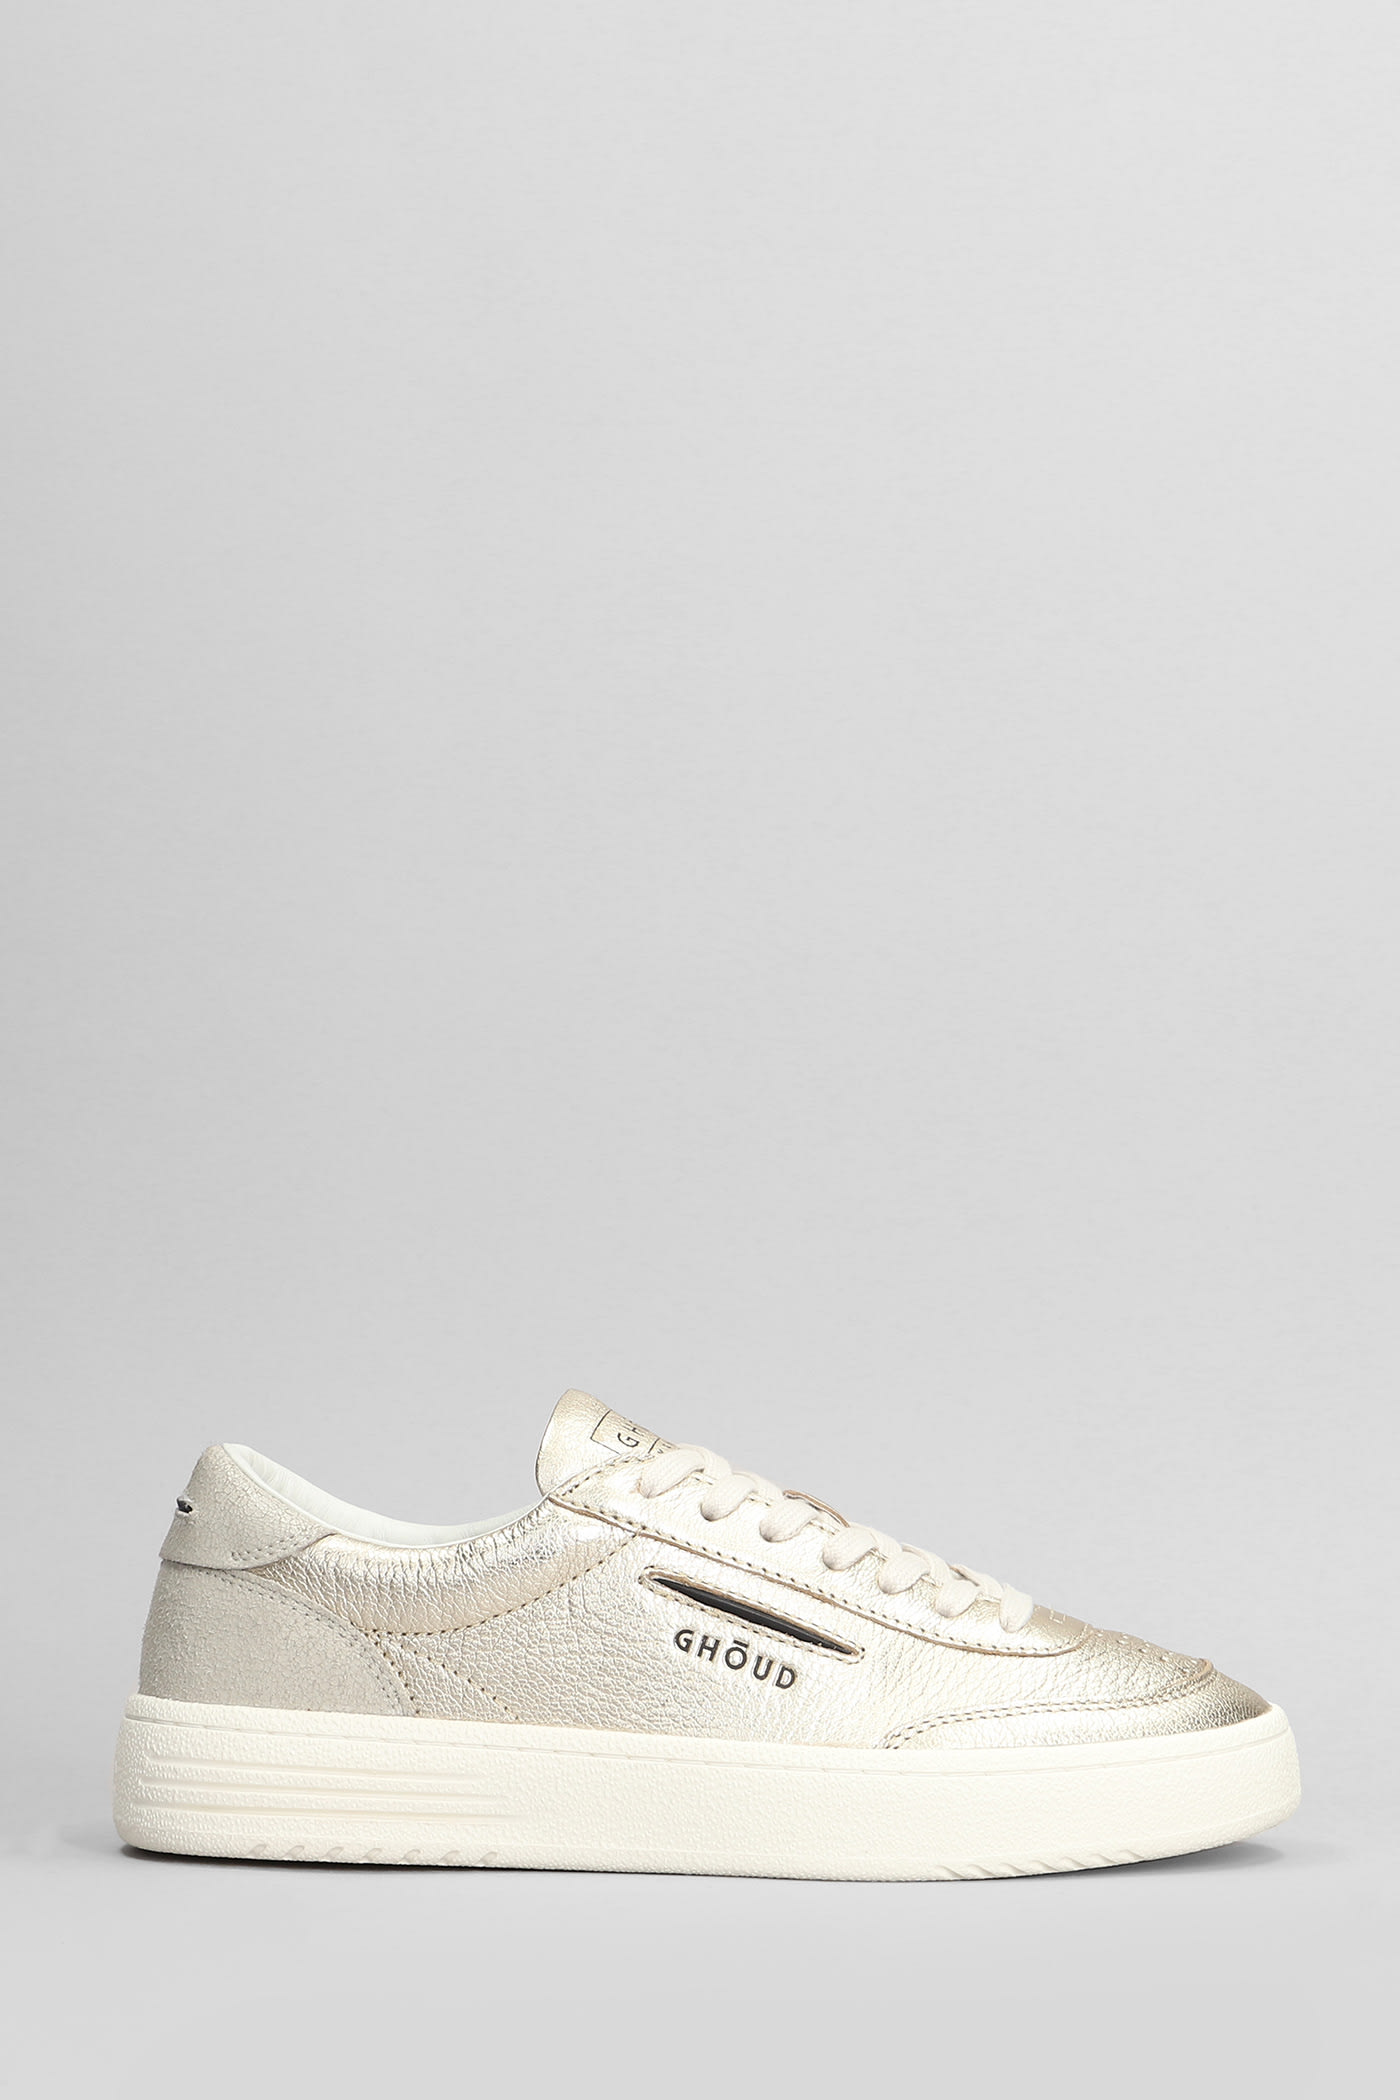 Ghoud Lindo Low Sneakers In Gold Leather